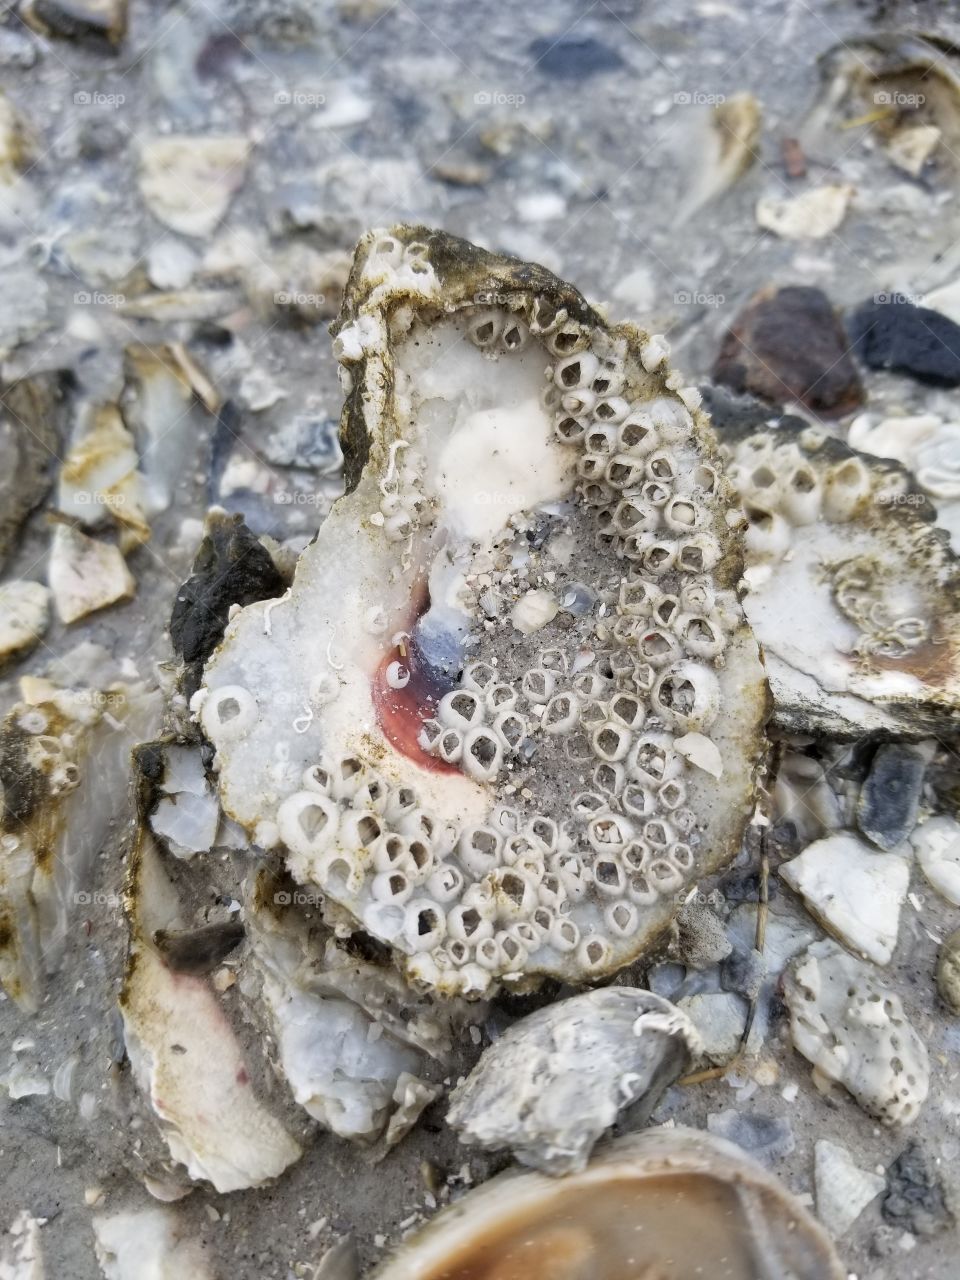 The beauty inside an oyster shell holds even after the barnacles invade